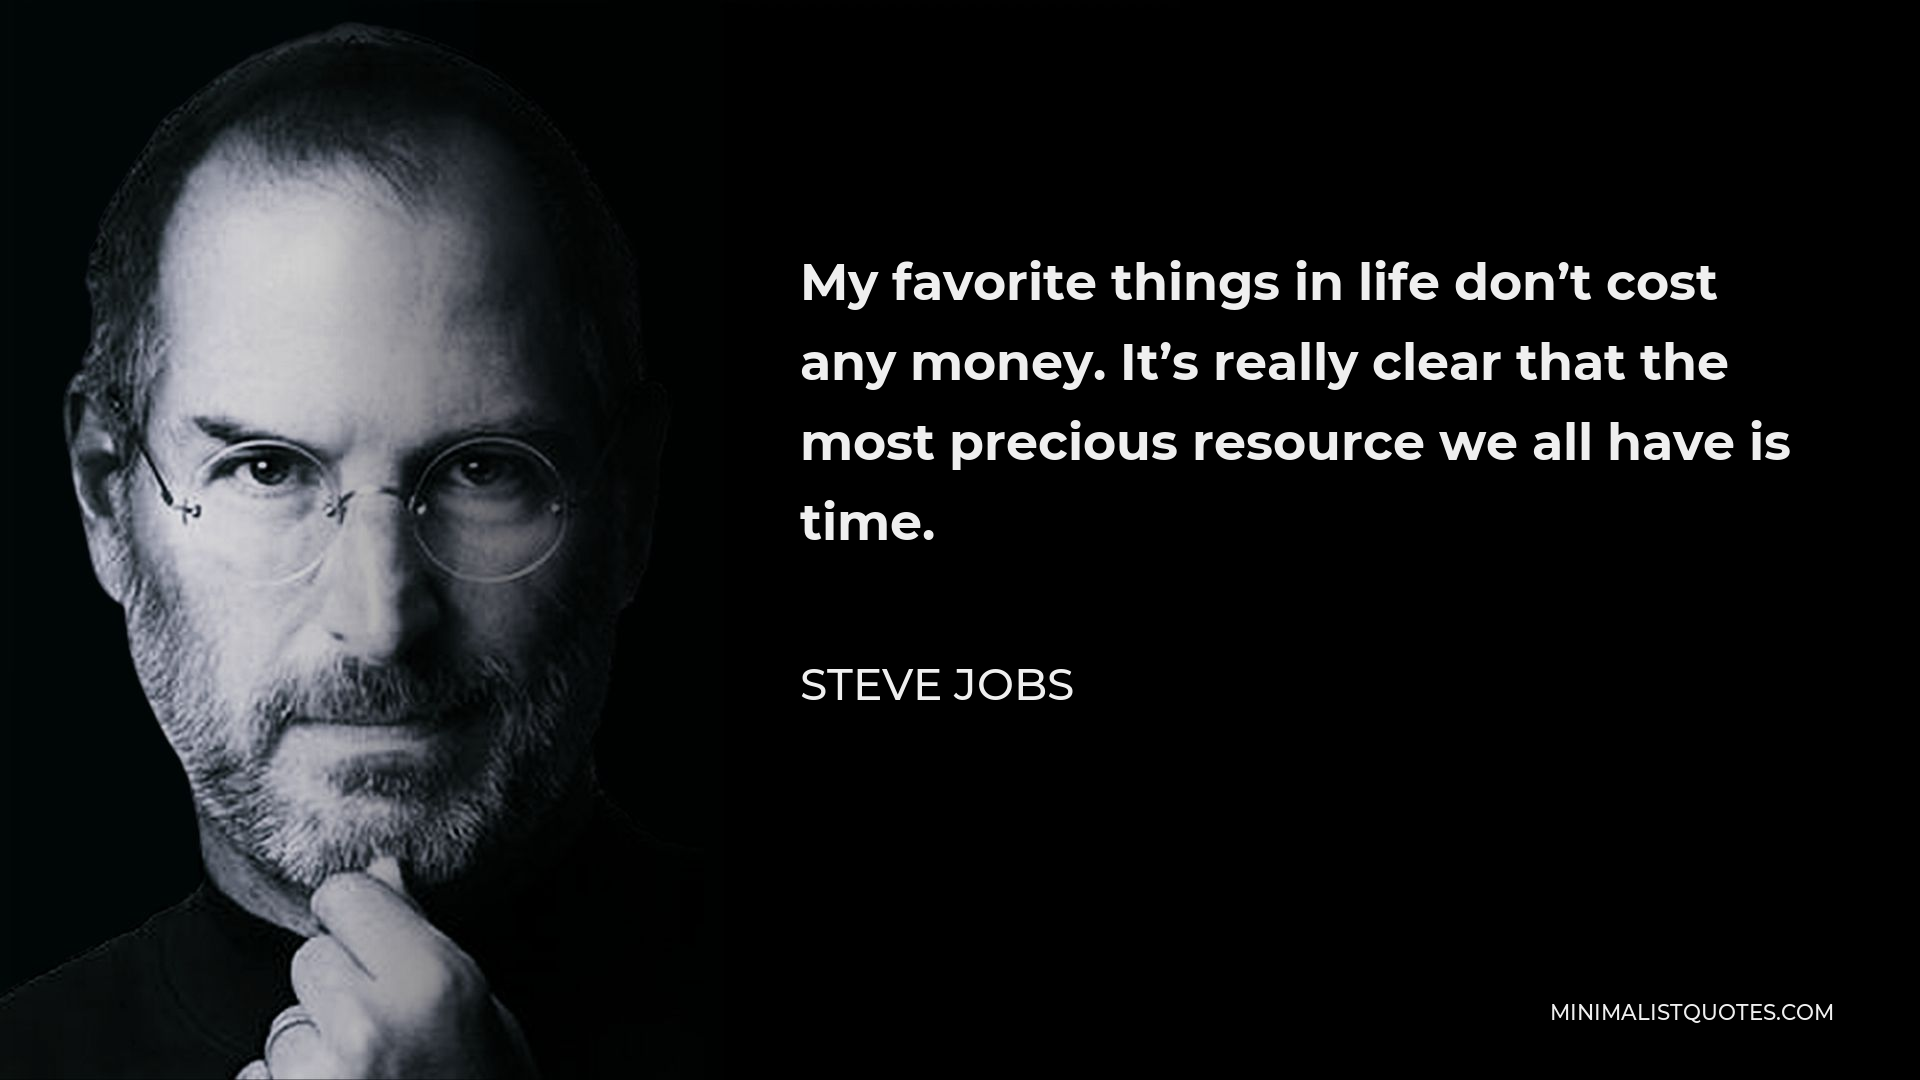 Steve Jobs Quote - My favorite things in life don’t cost any money. It’s really clear that the most precious resource we all have is time.